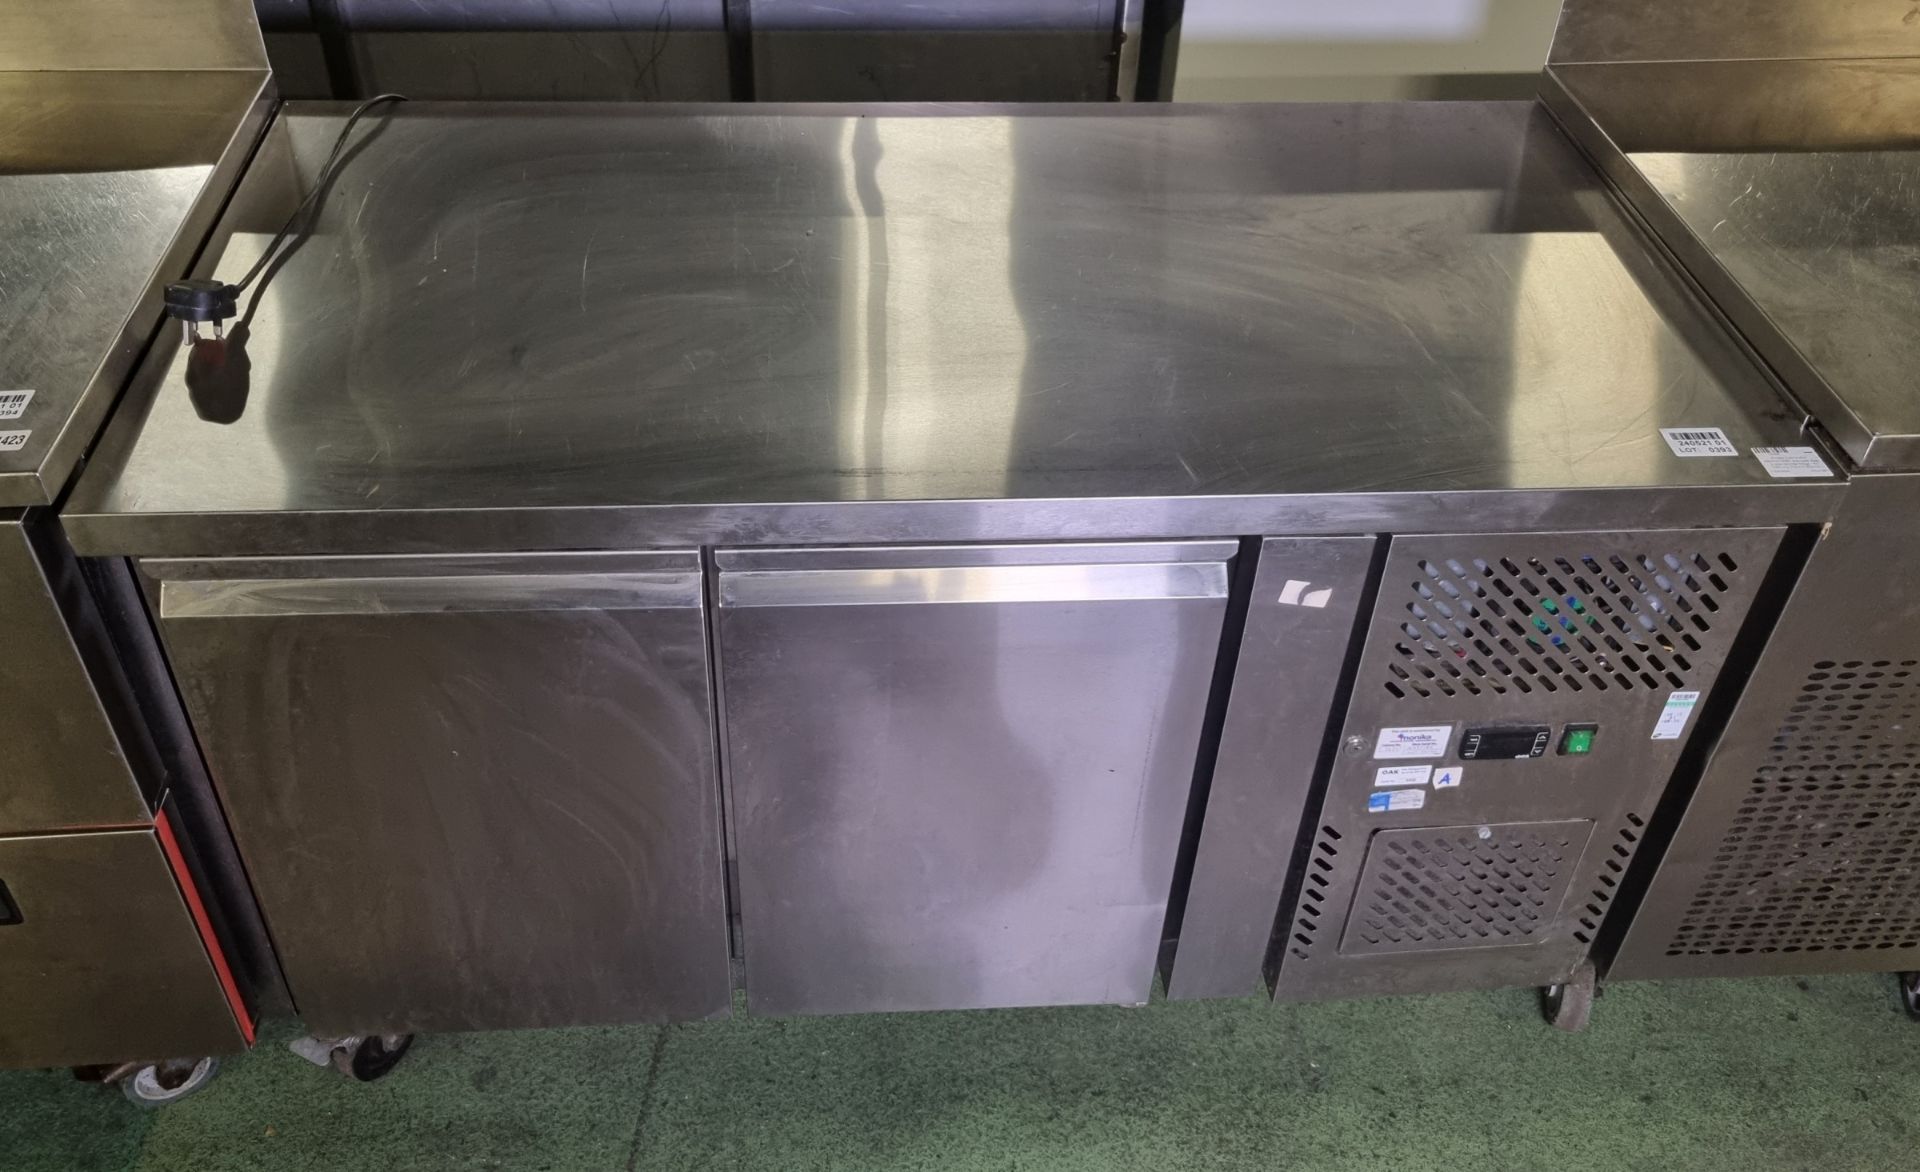 Project Distribution ABGN2100BT stainless steel 2 door counter fridge - W 1360 x D 700 x H 850mm - Image 2 of 6